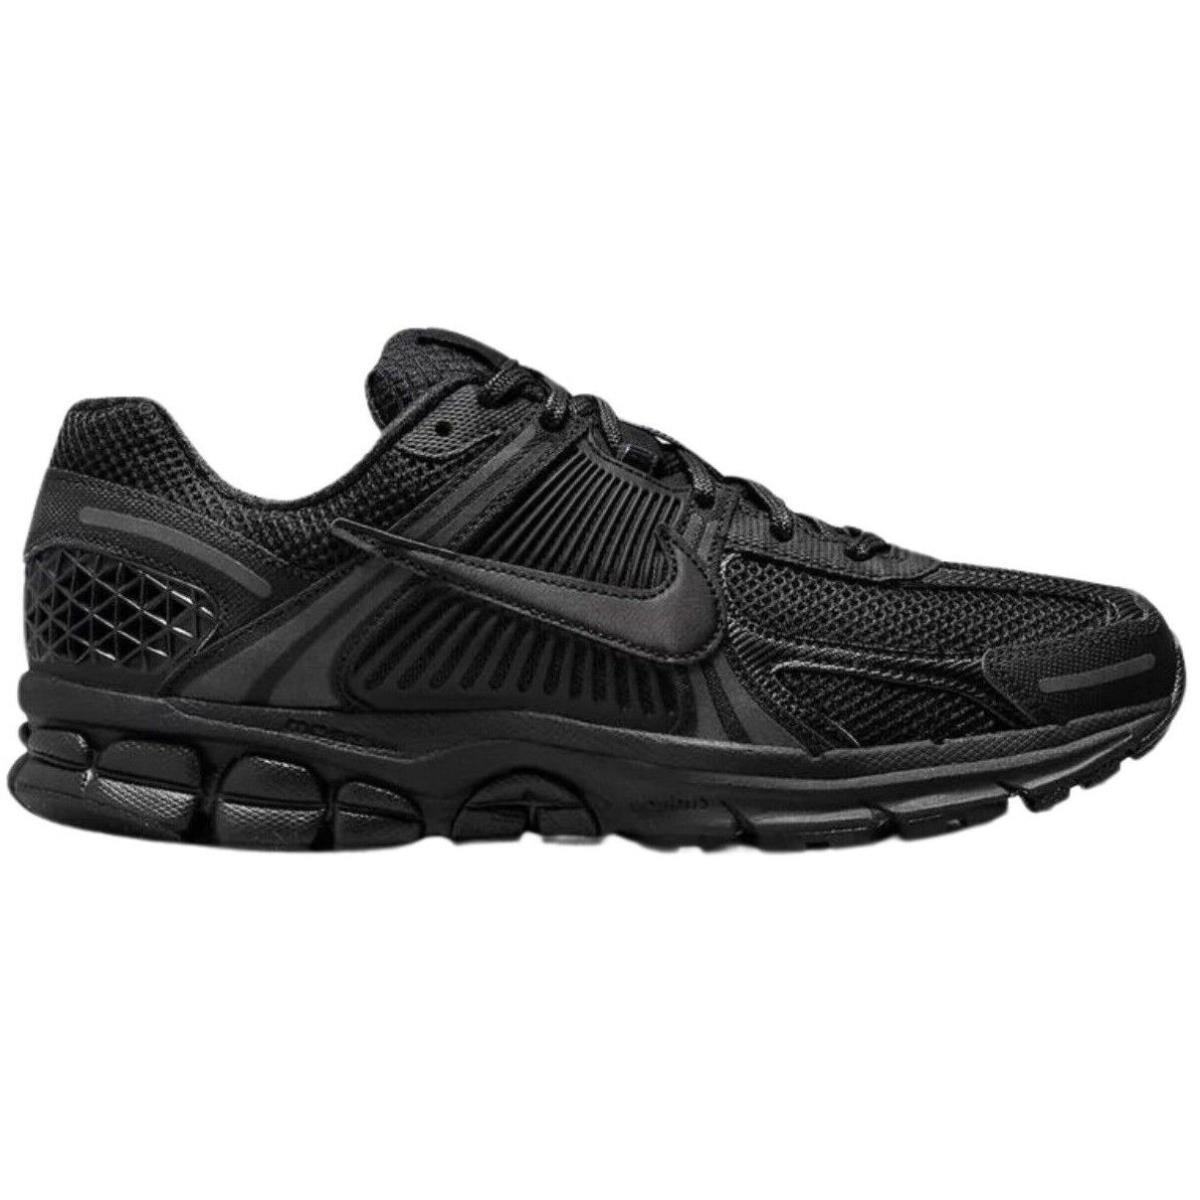 Nike Zoom Vomero 5 Men`s Casual Shoes All Colors US Sizes 7-14 Black / Black